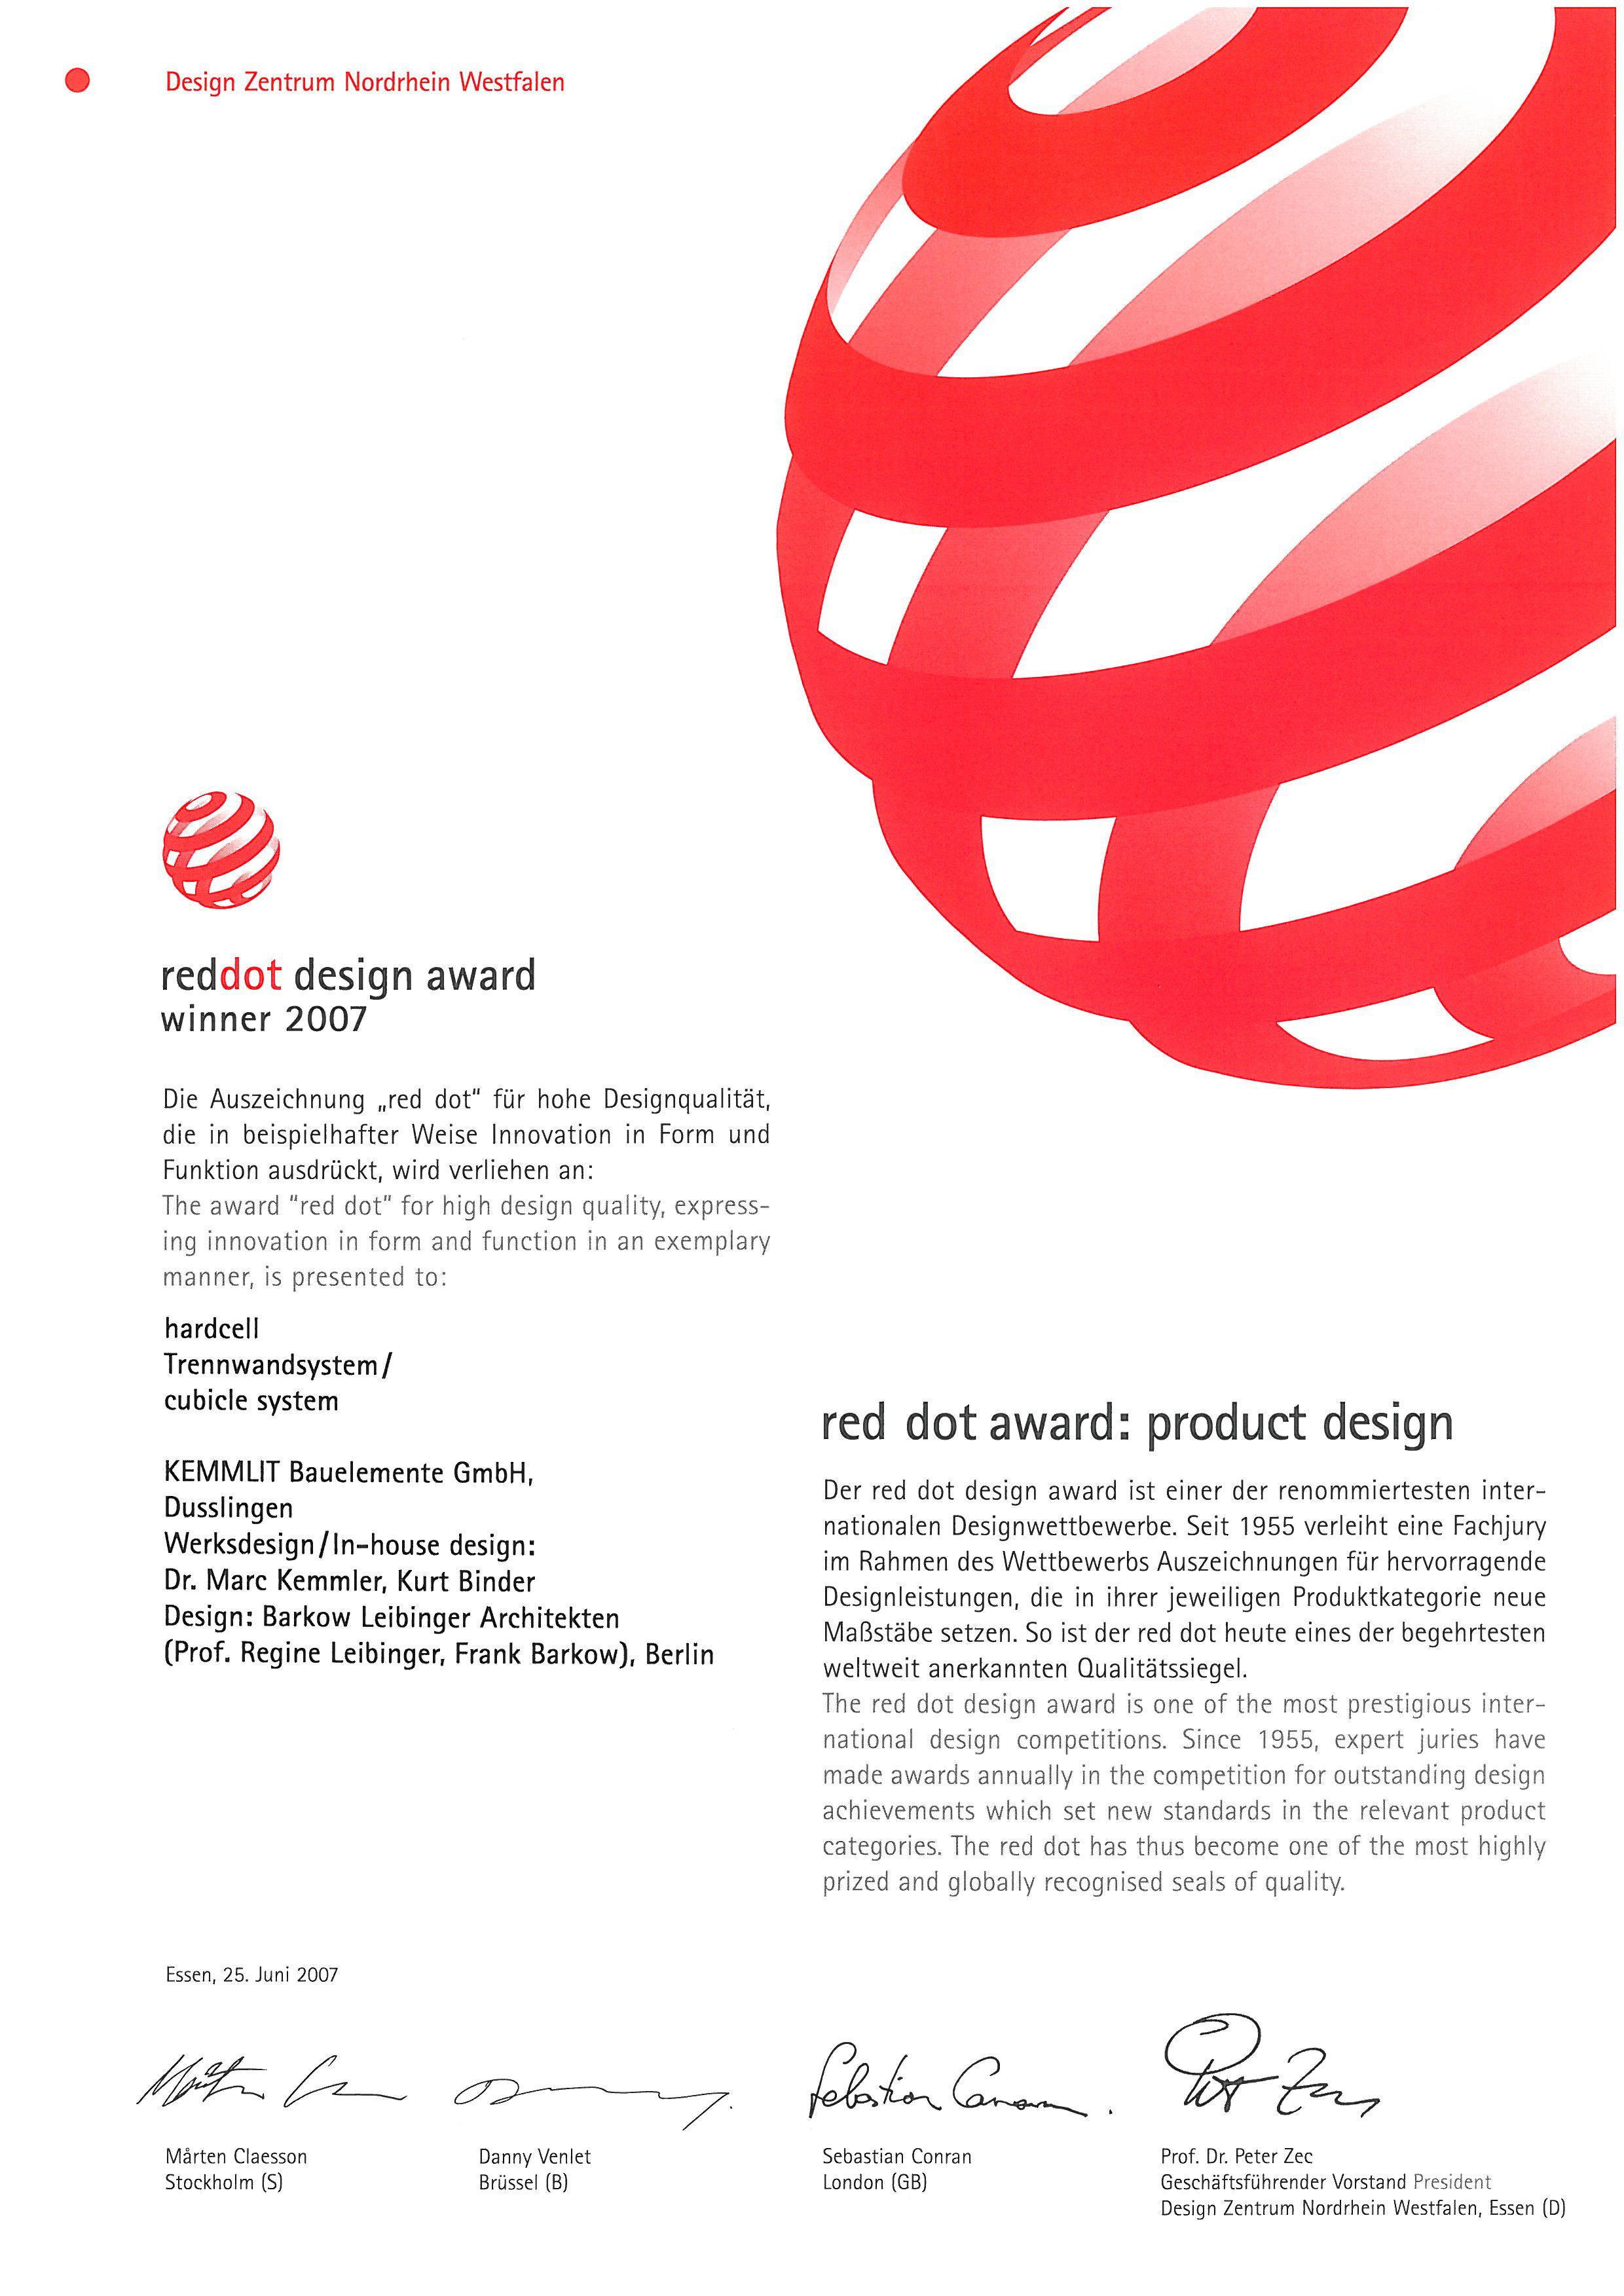 reddot Design Award Soft CELL Cubicle System